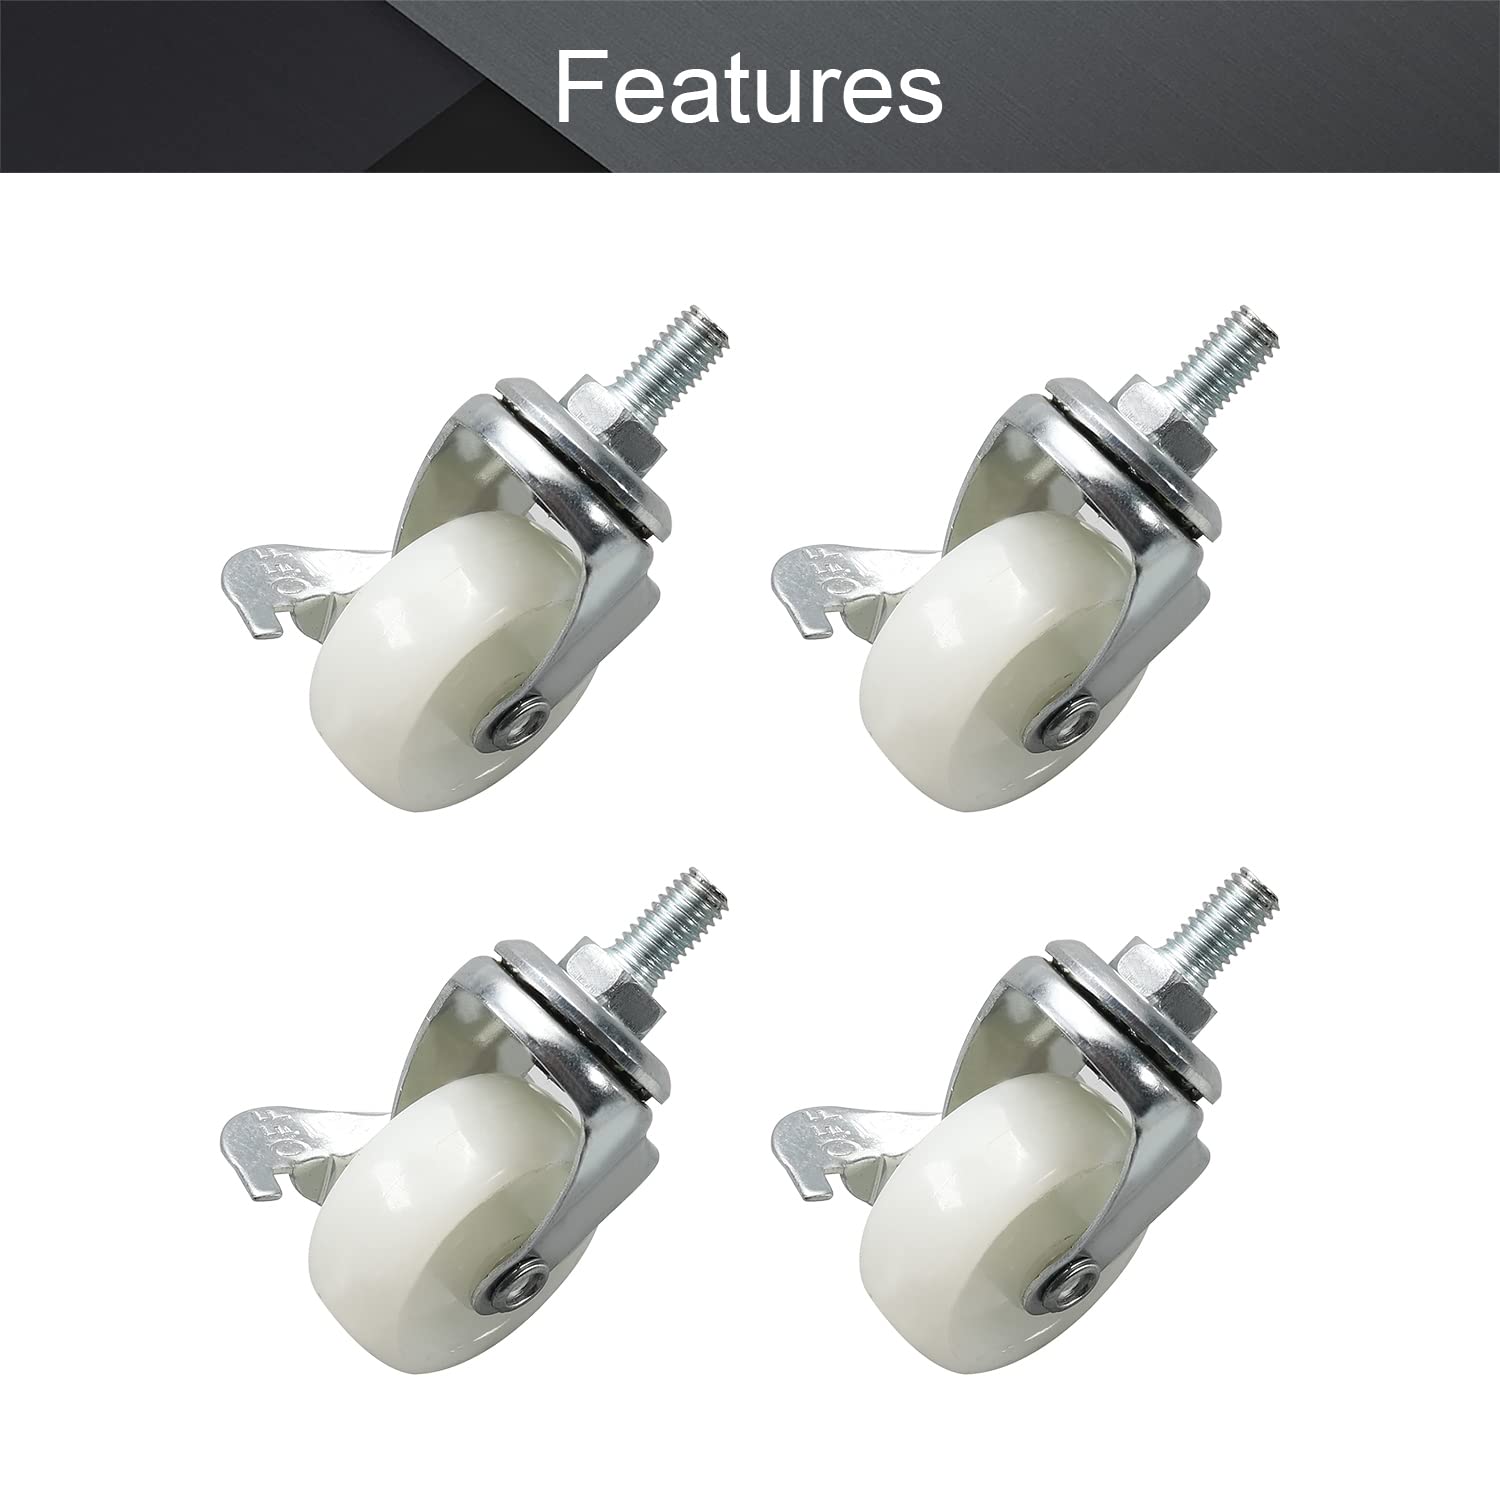 Caster Furniture，Rubbered Trolley Wheels ， Castor Wheels,Furniture Casters,Swivel Casters 1.54 Inch Nylon 360 Degree Threaded Caster with Brake Wheels White 44lb Capacity 4pcs